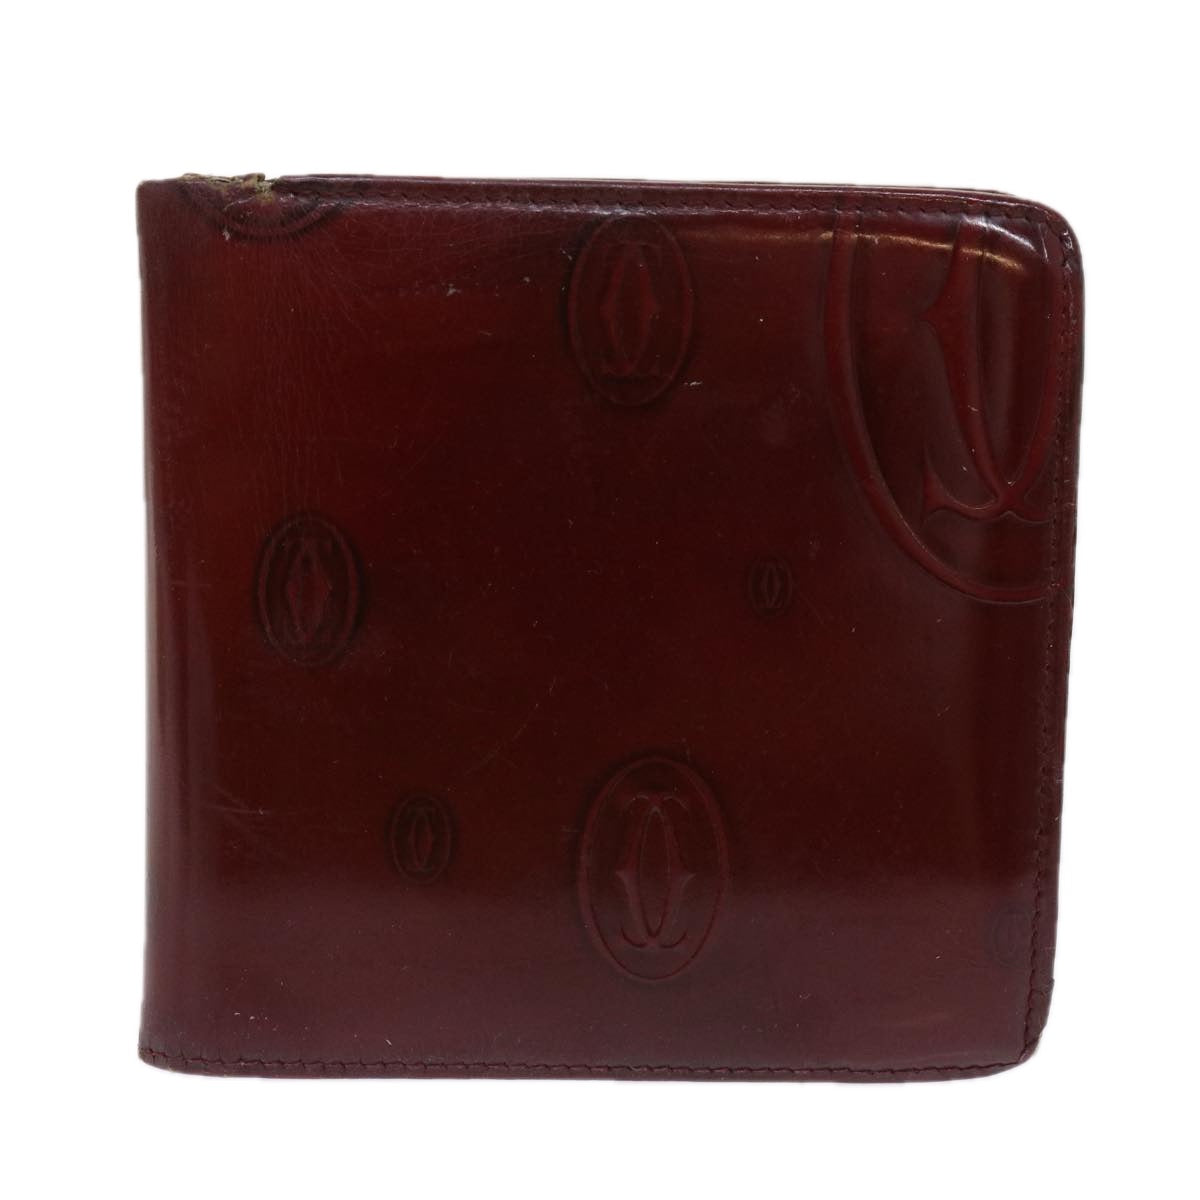 CARTIER Wallet Leather 6Set Wine Red Black Auth ar11264